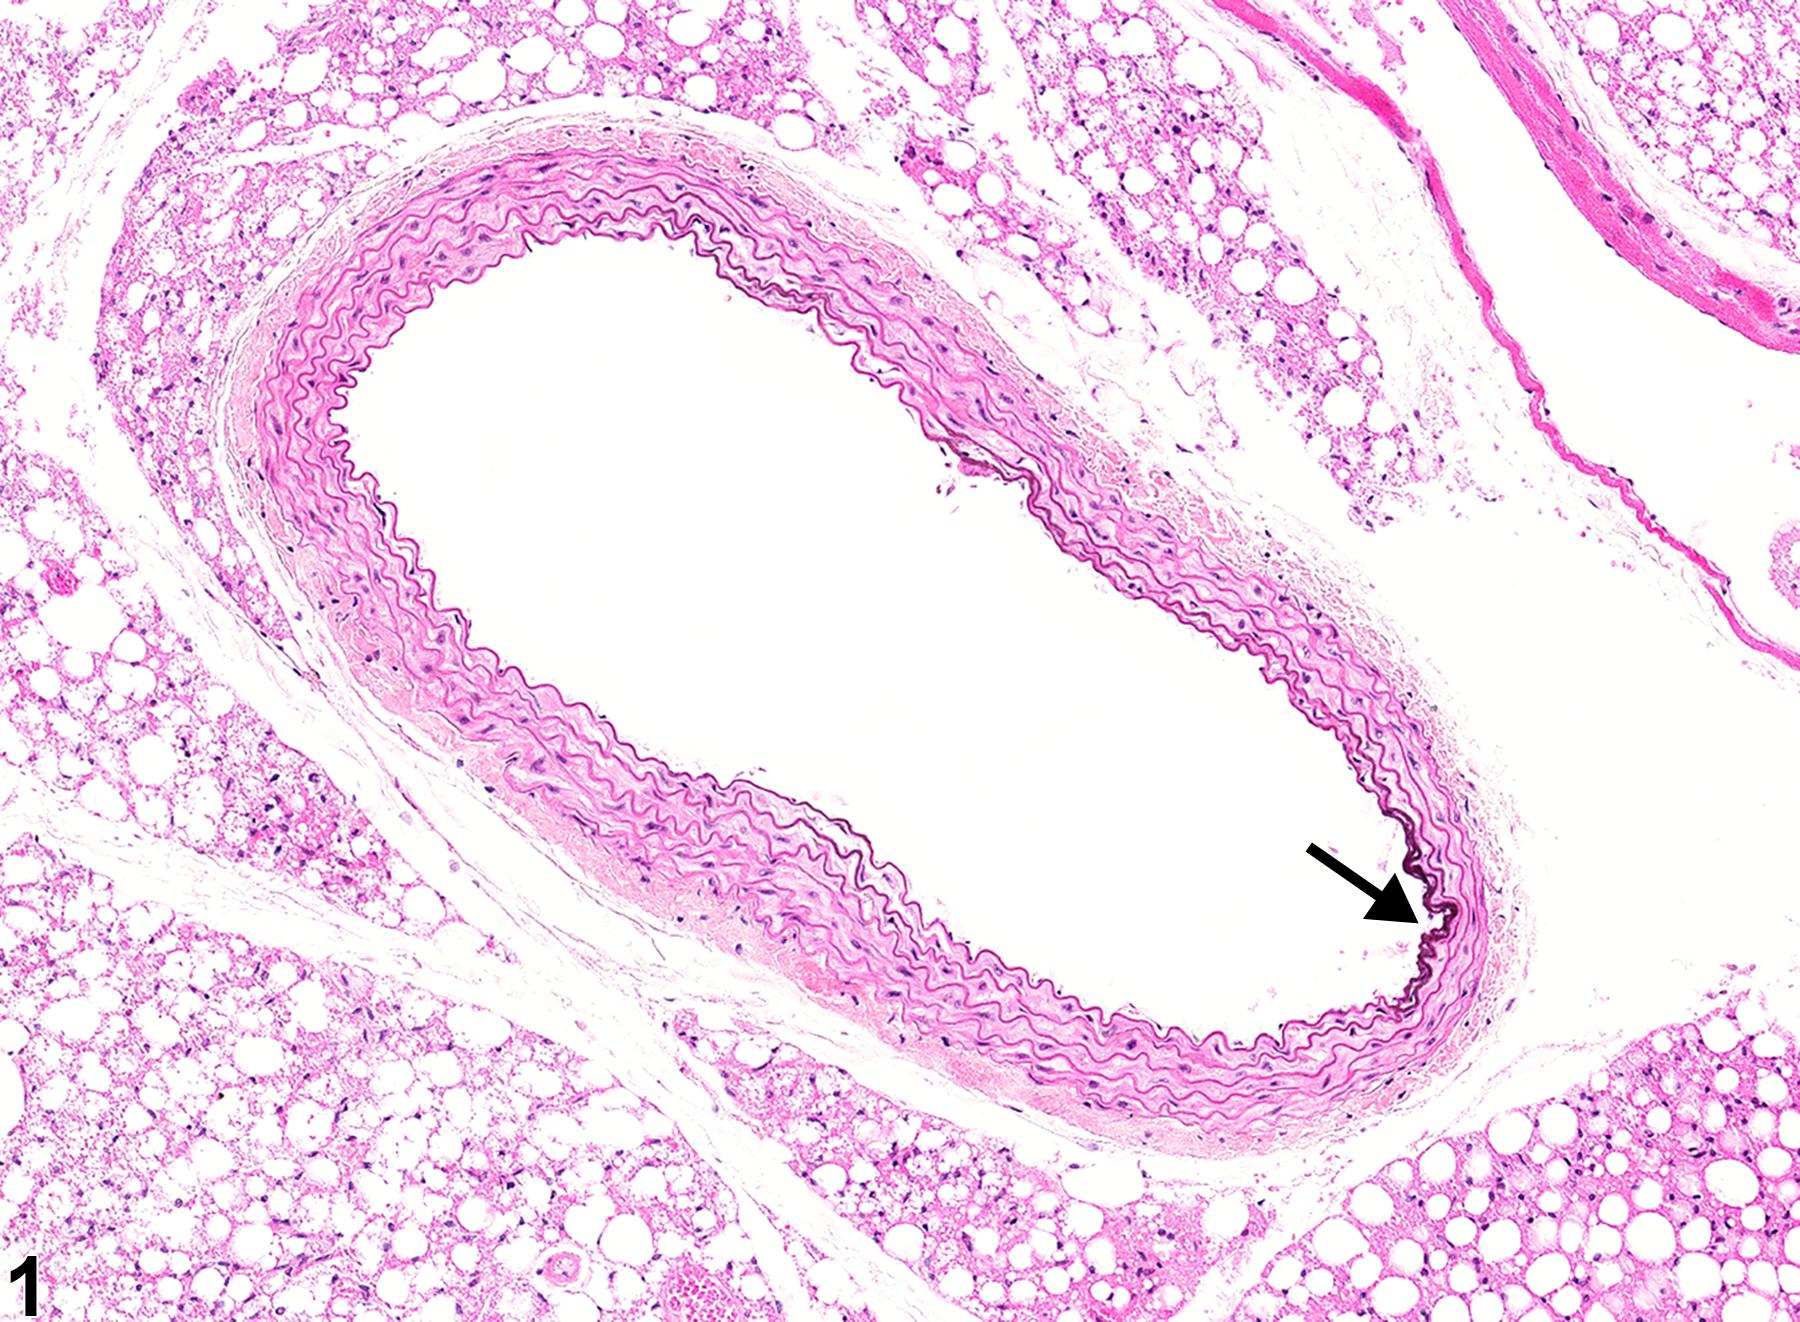 Image of mineral in the aorta from a male B6C3F1/N mouse in a chronic study